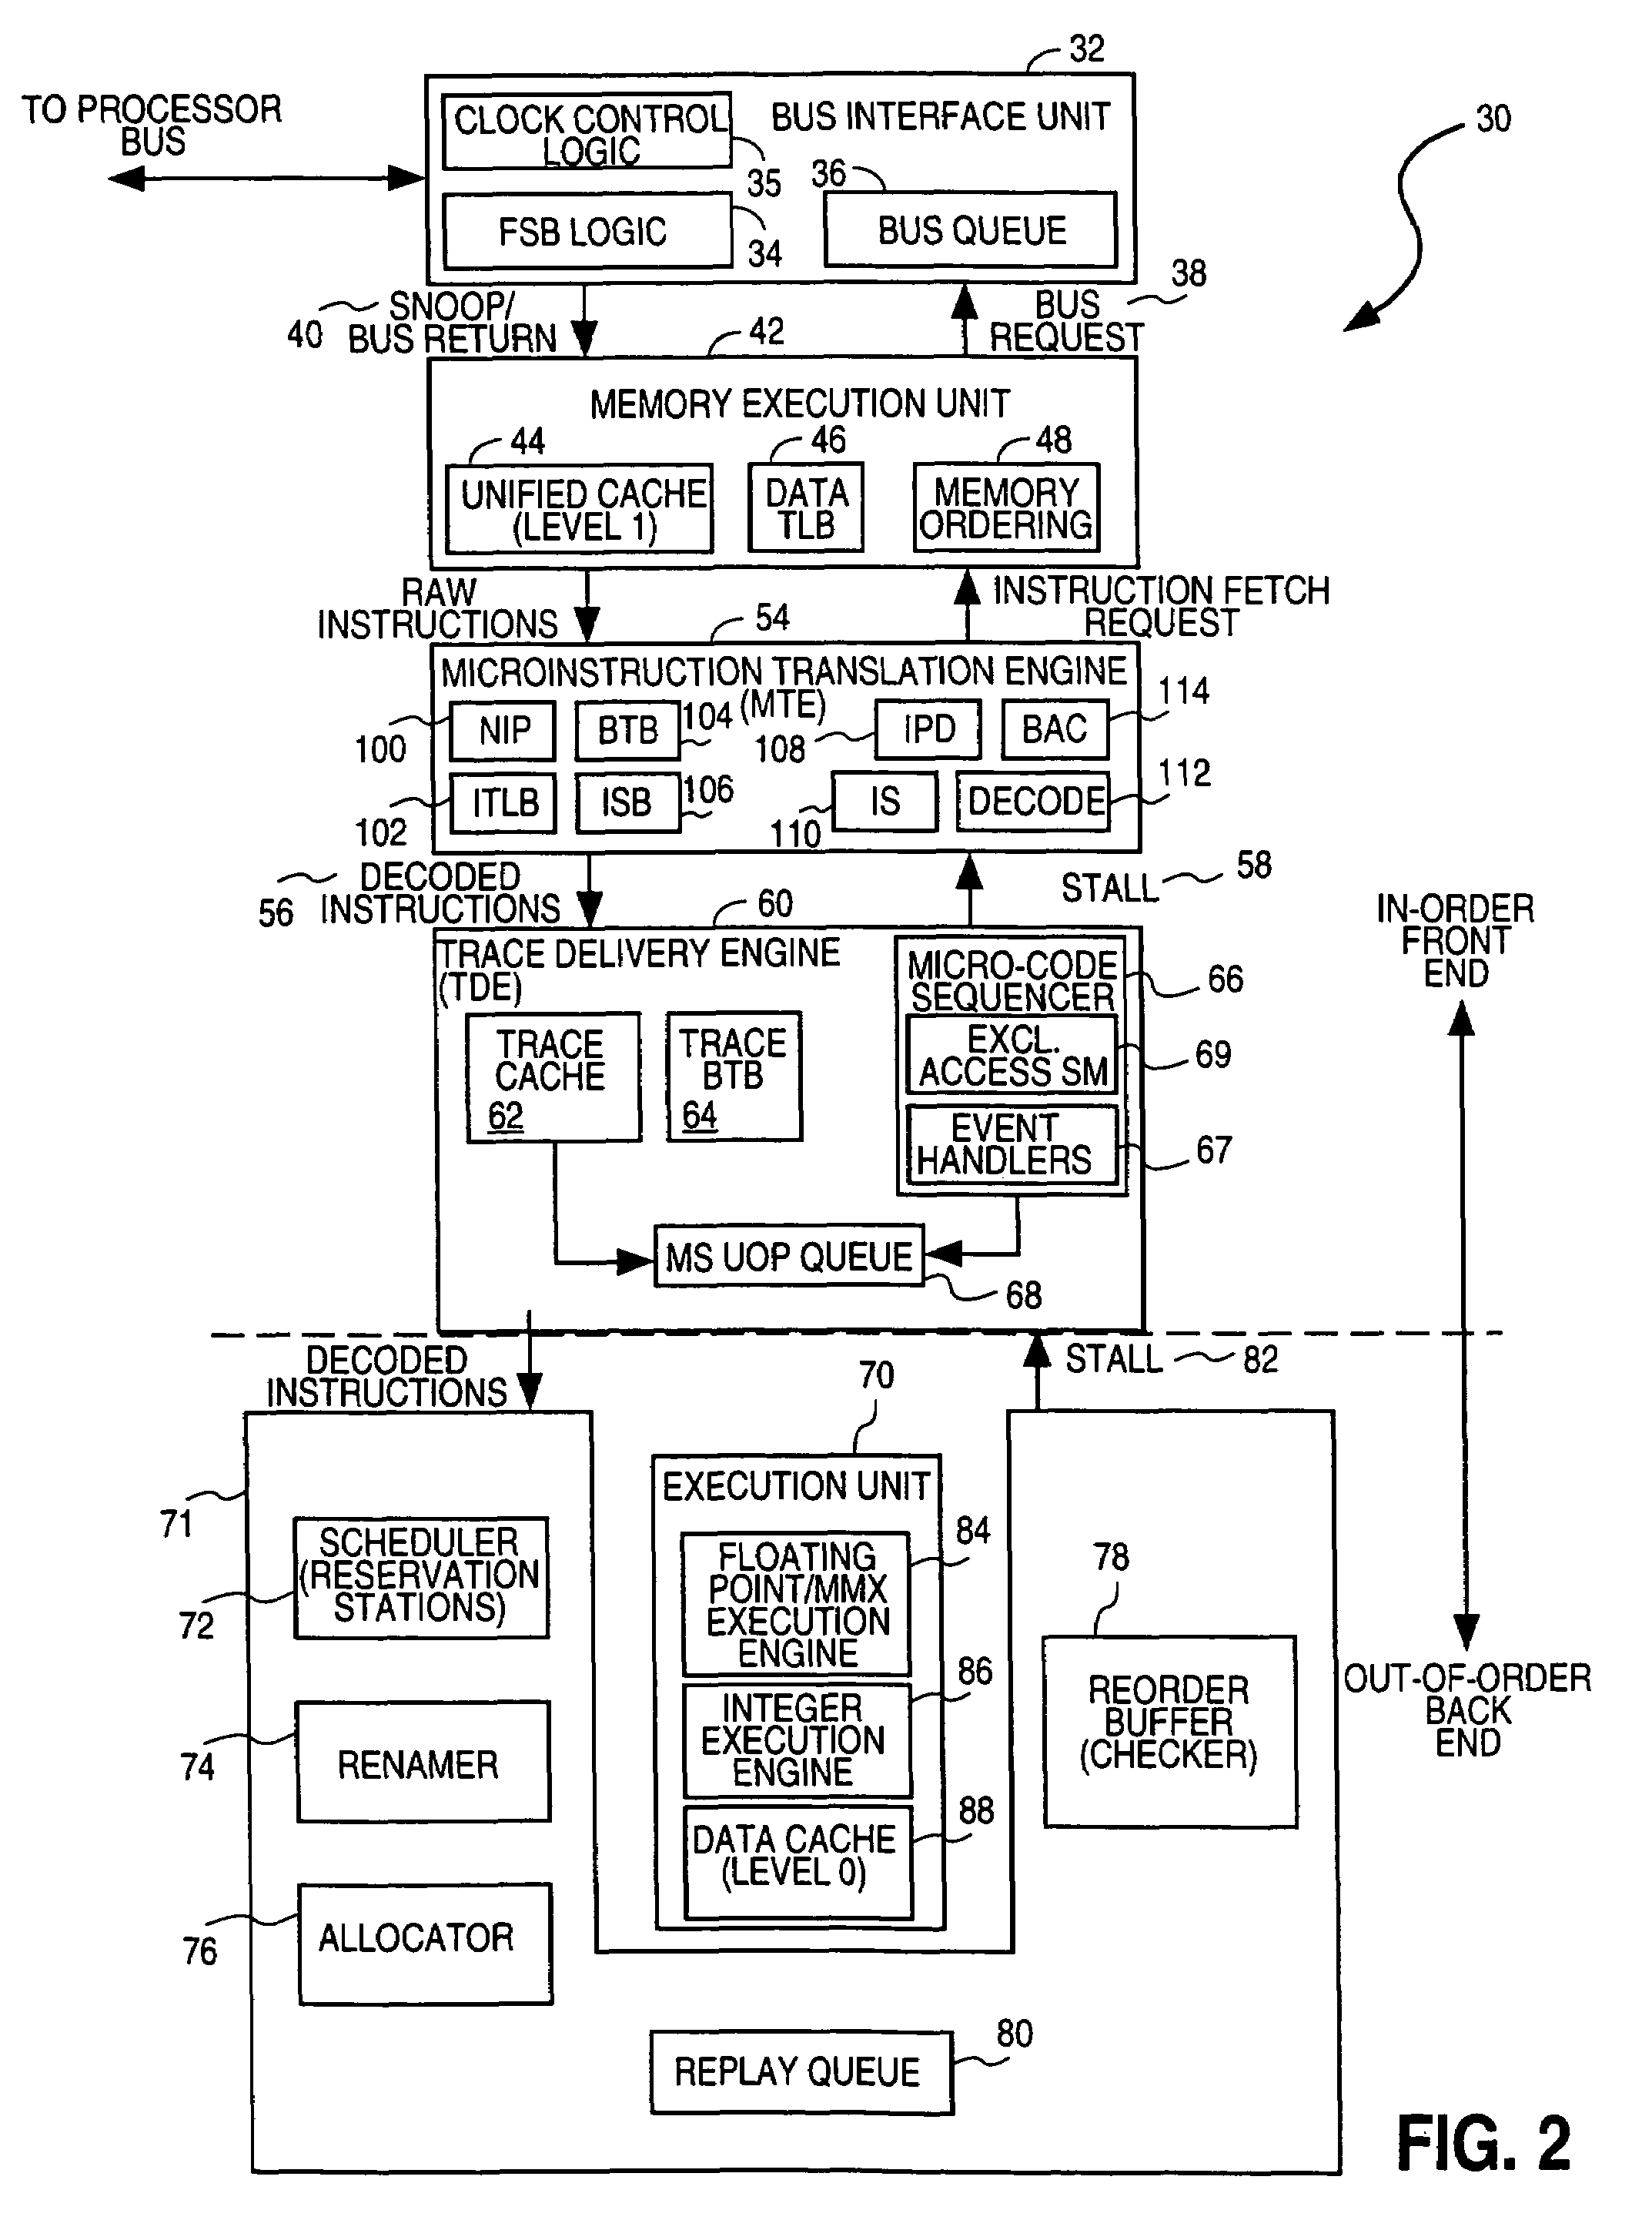 Method and apparatus selectively to advance a write pointer for a queue based on the indicated validity or invalidity of an instruction stored within the queue